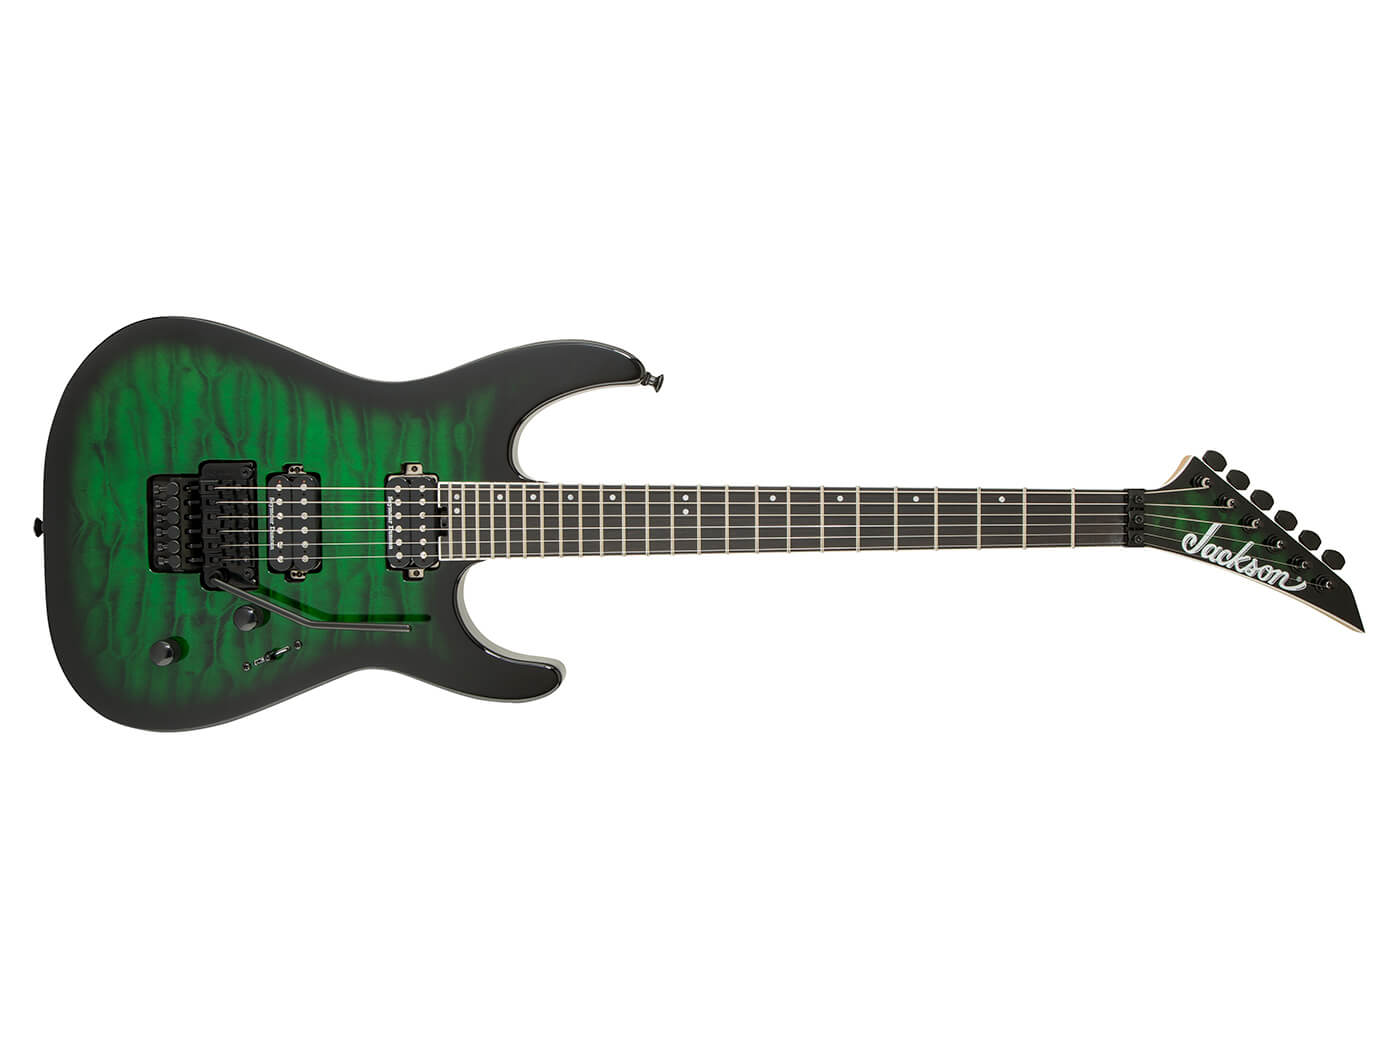 The Pro Series Dinky DK2Q in Transparent Green Burst